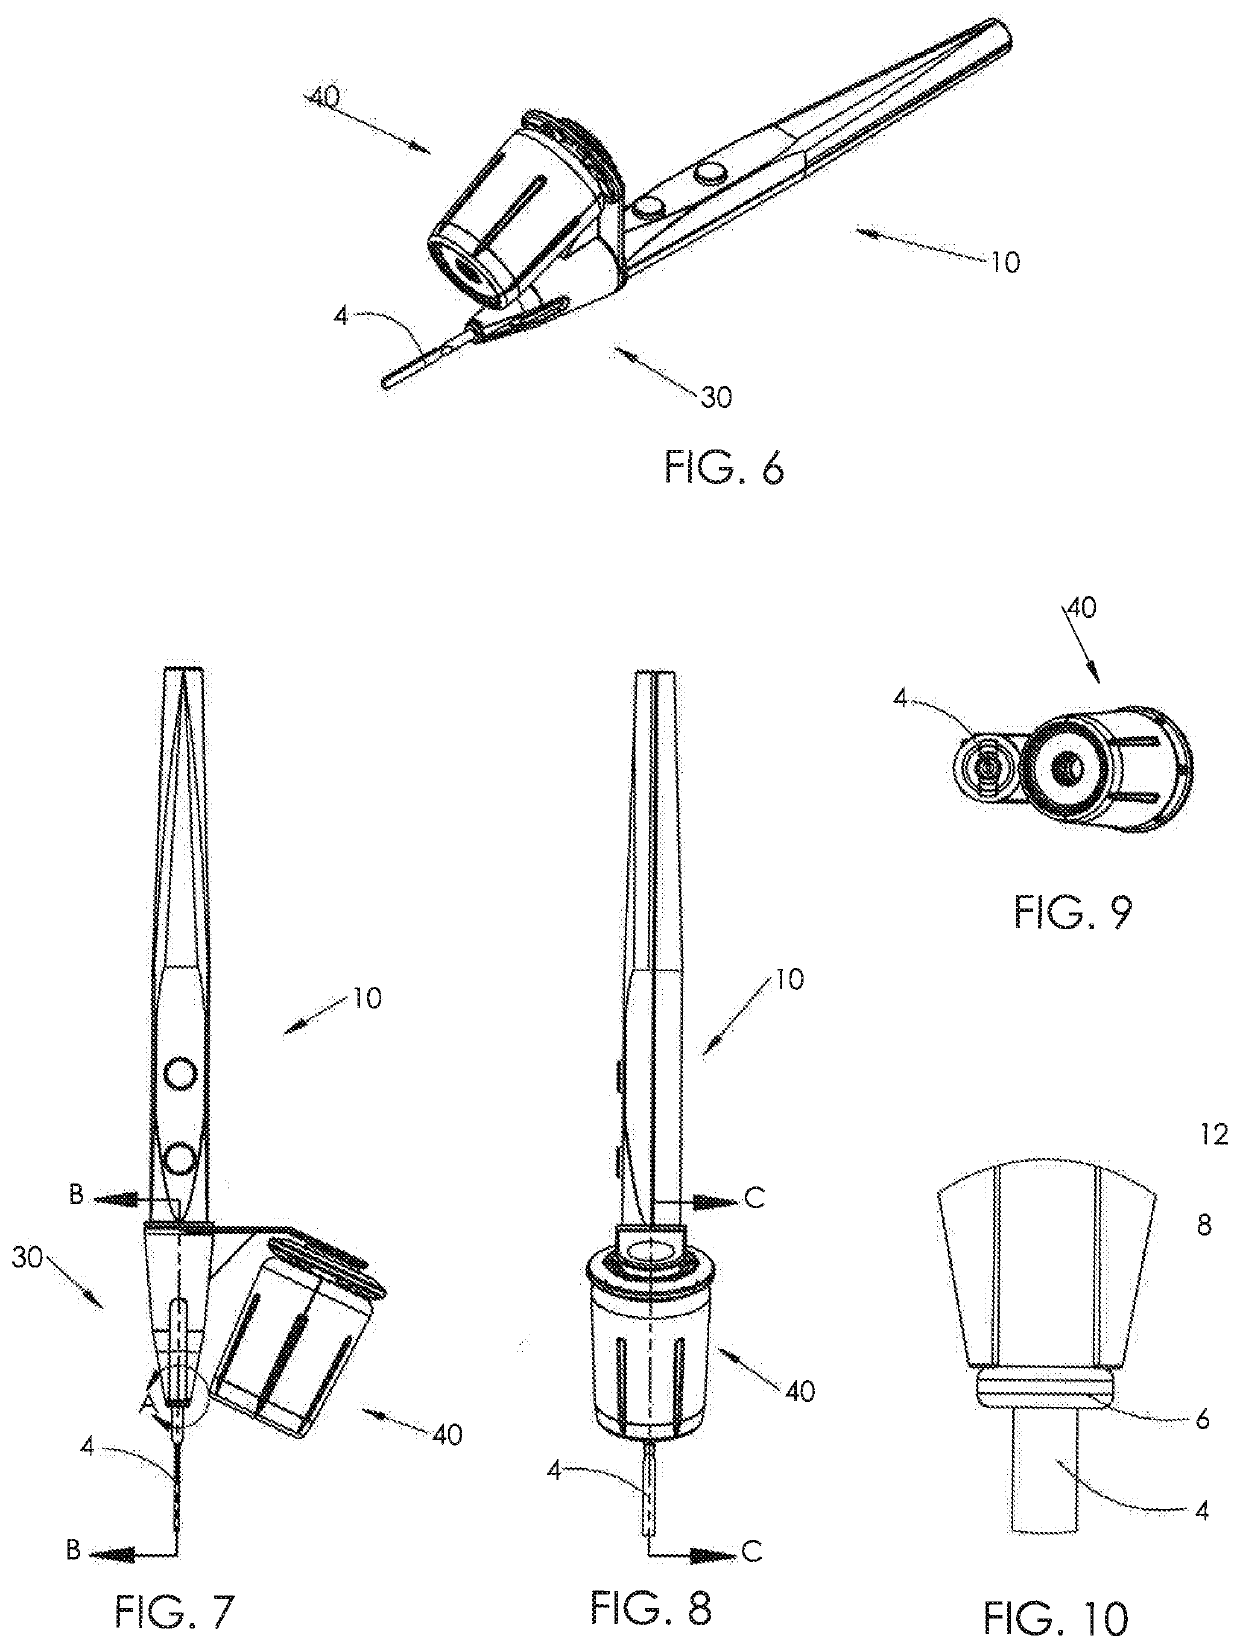 Adapter assembly for attaching a lighting device to a handheld electrosurgical instrument